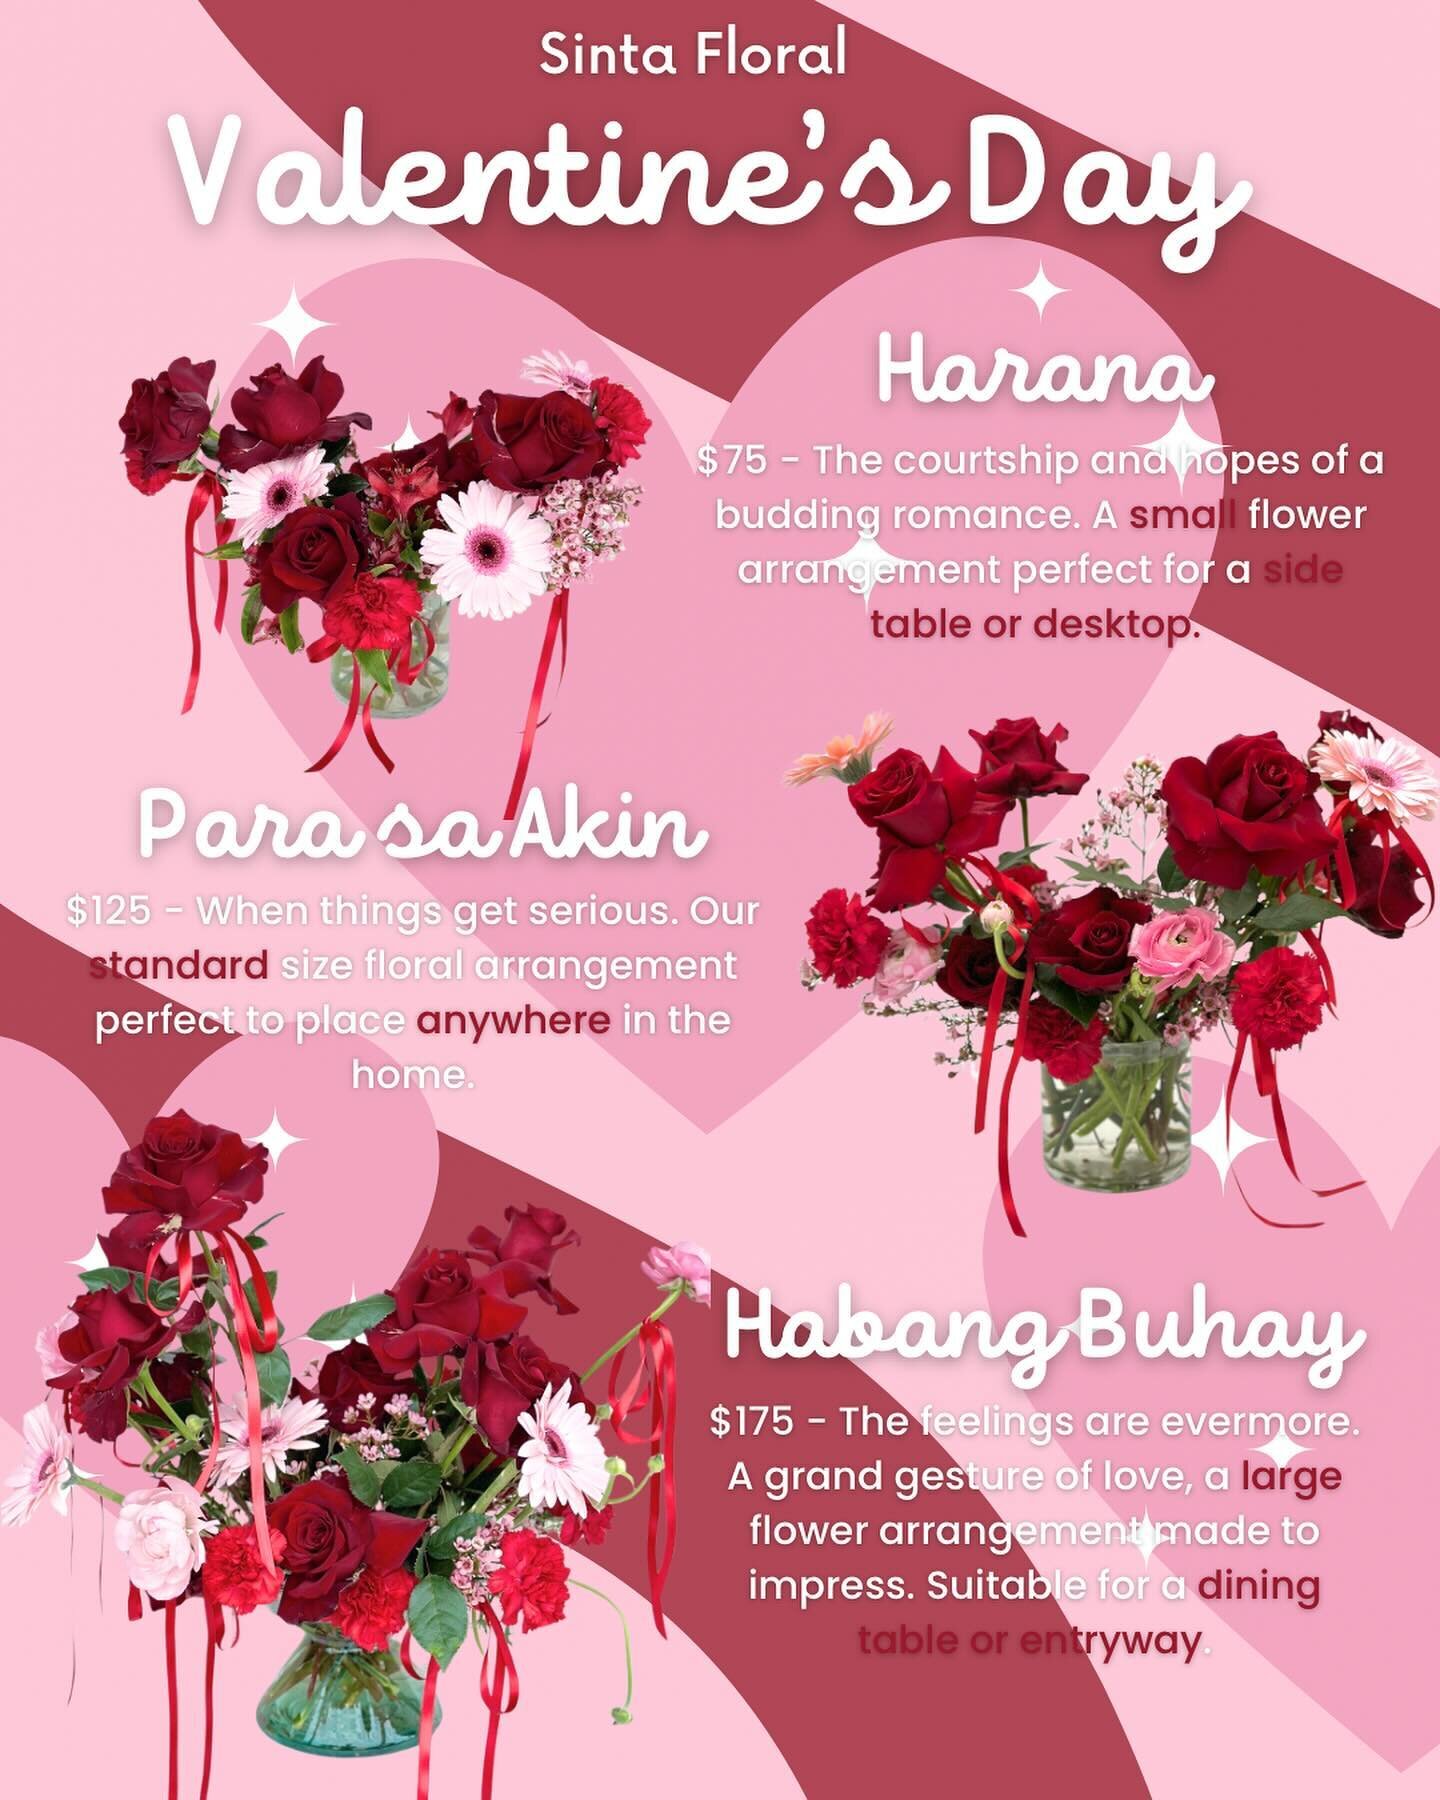 Inspired by Harana, the Filipino art of serenade, each arrangement in Sinta Floral&rsquo;s Valentine&rsquo;s collection reflects the passion of these love songs. 🎶🎤&hearts;️

Order now &mdash;Valentine&rsquo;s Day is just 4 days away! We&rsquo;re e